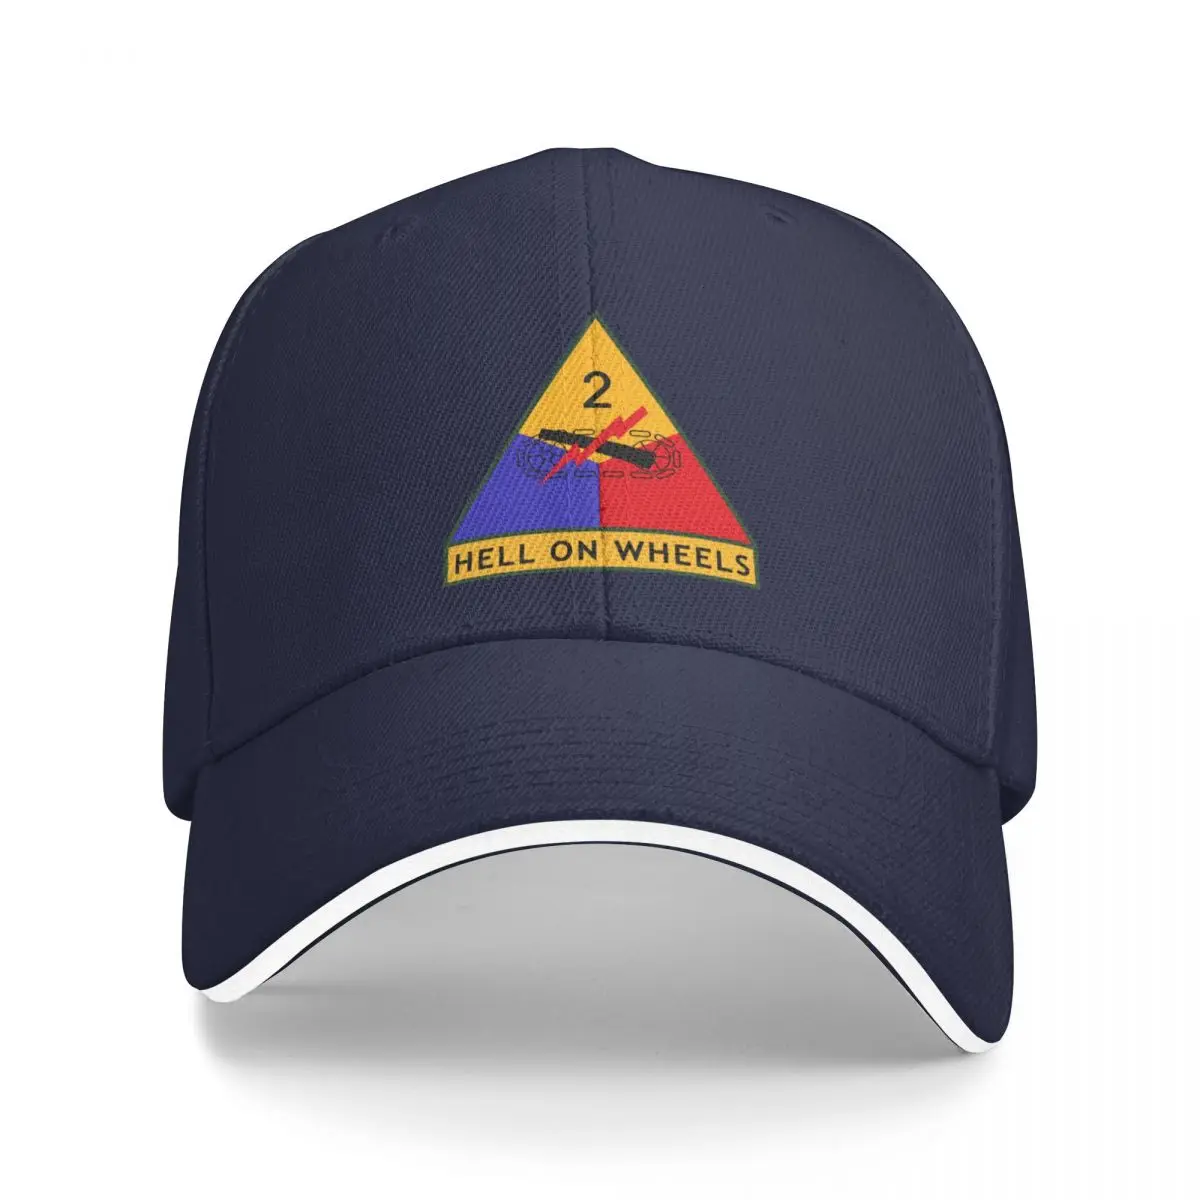 

New 2nd Armored Division Hell on Wheels quot (United States Army) Baseball Cap Golf Hat Snap Back Hat Anime Hat Men Hats Women